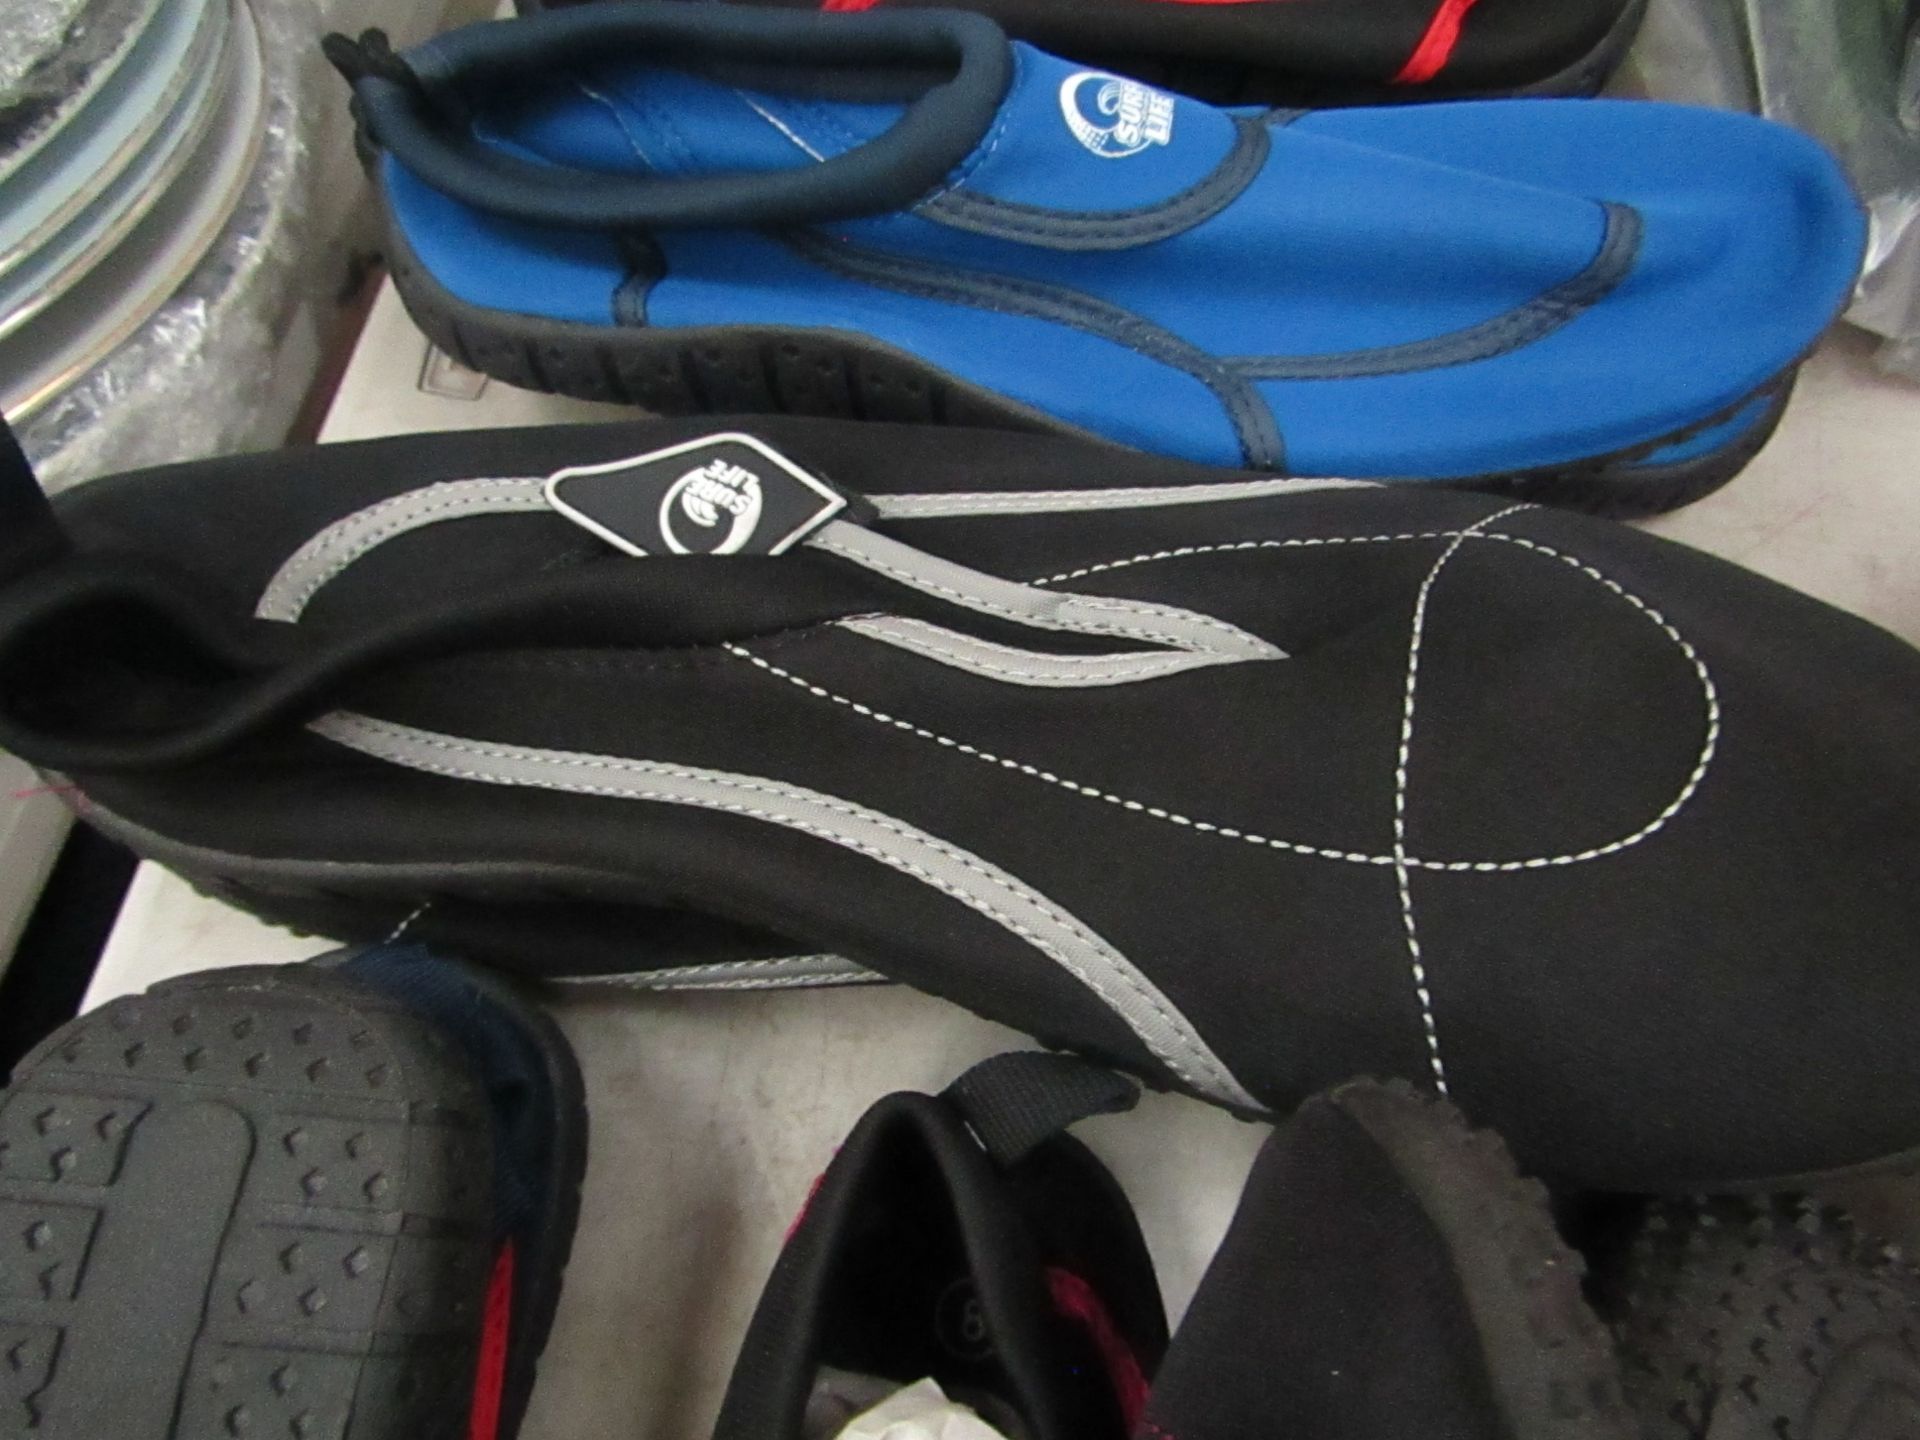 Surf Life - Waterproof Shoes - Size 9 - See Image For Design - No Packaging.